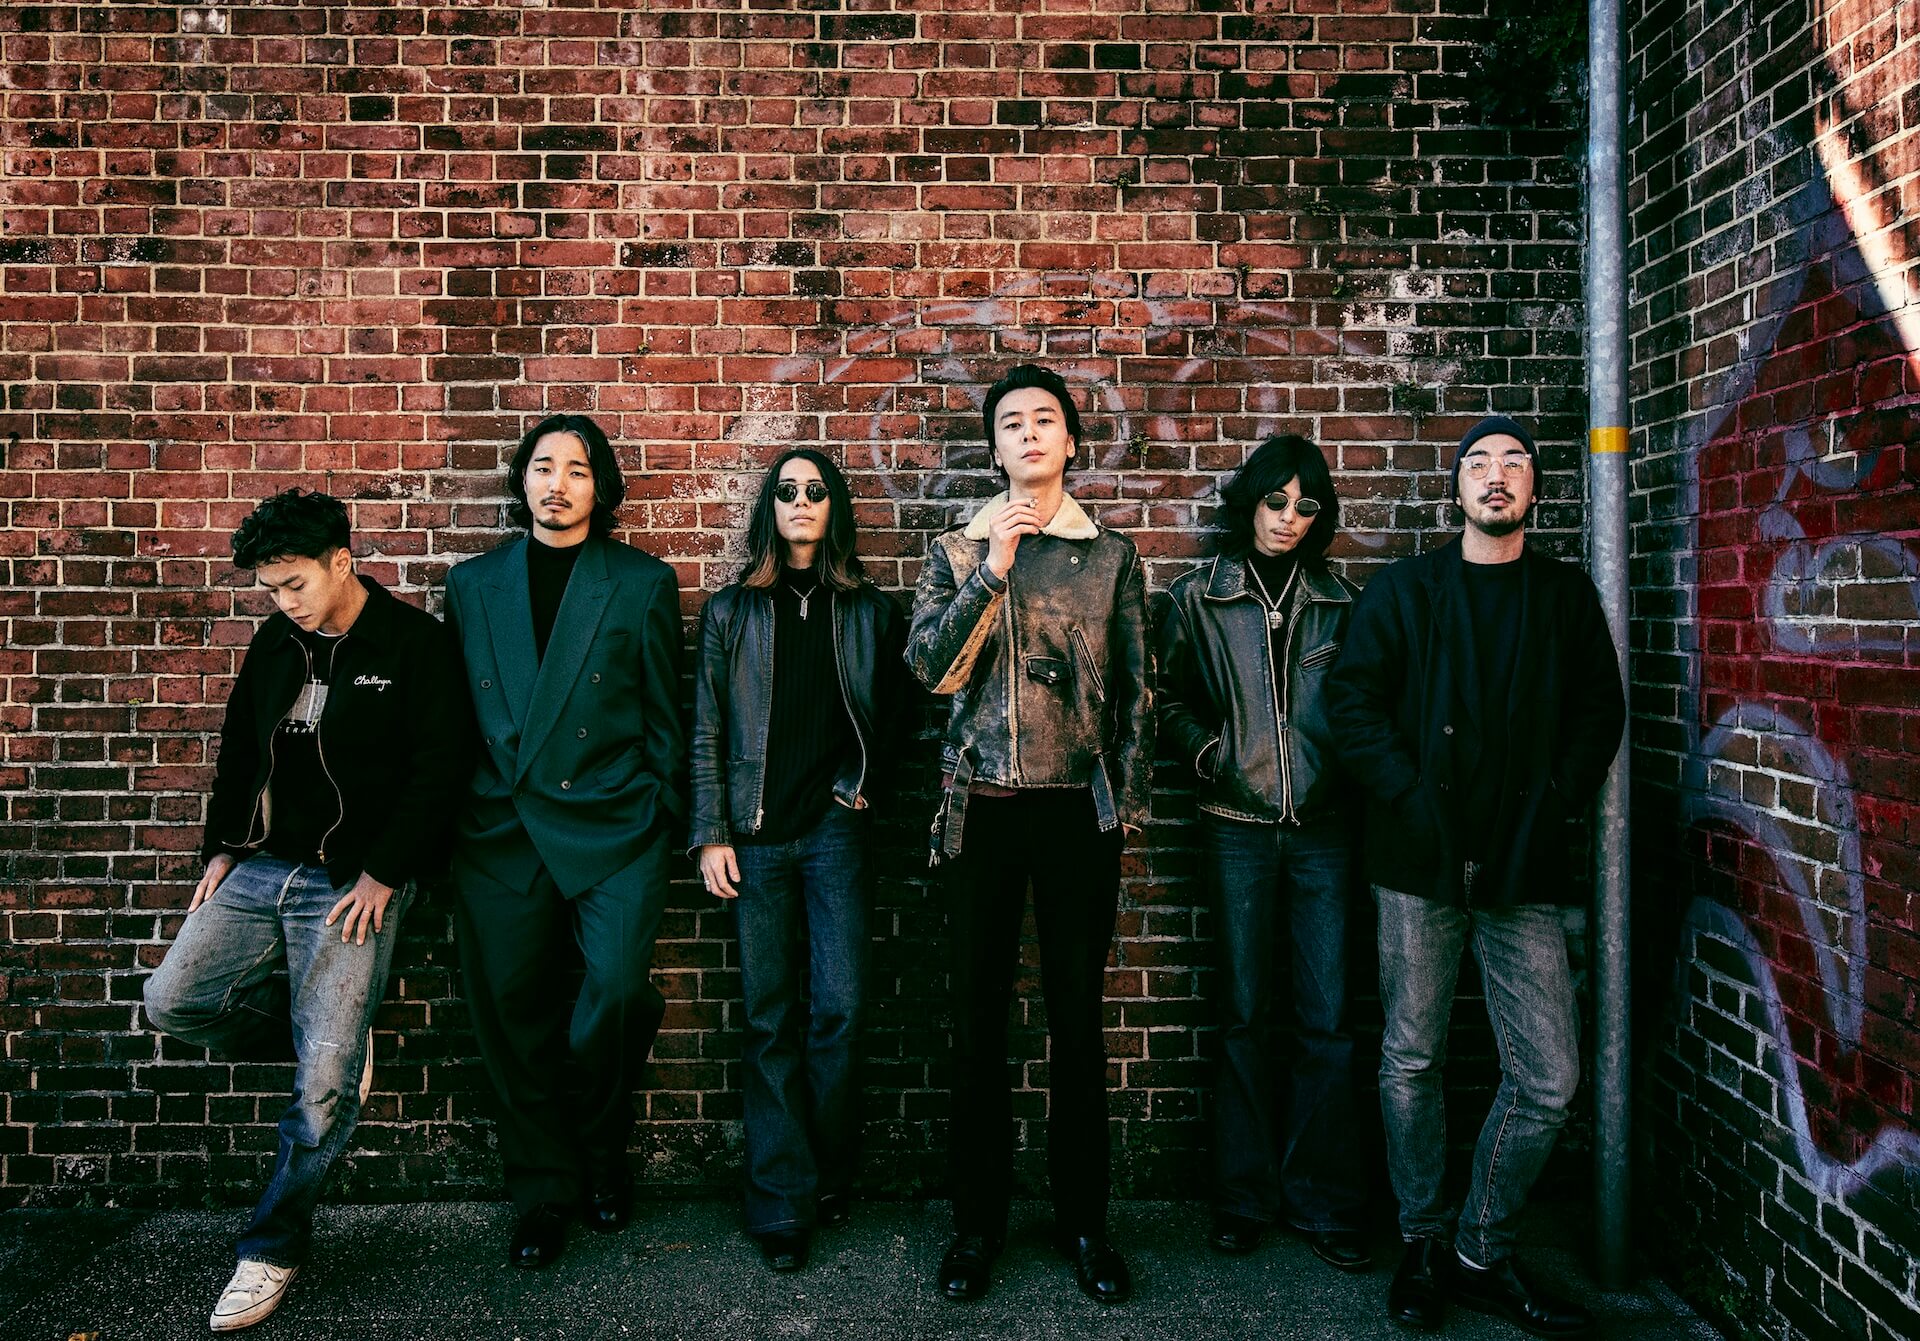 Suchmos『The Blow Your Mind TOUR 2020』対バン＆ゲスト第一弾発表｜浅井健一 & THE INTERCHANGE KILLS 、The Birthday、ペトロールズ、ceroらが参加、神奈川公演に松任谷由実がゲスト出演 music200106-suchmos-1